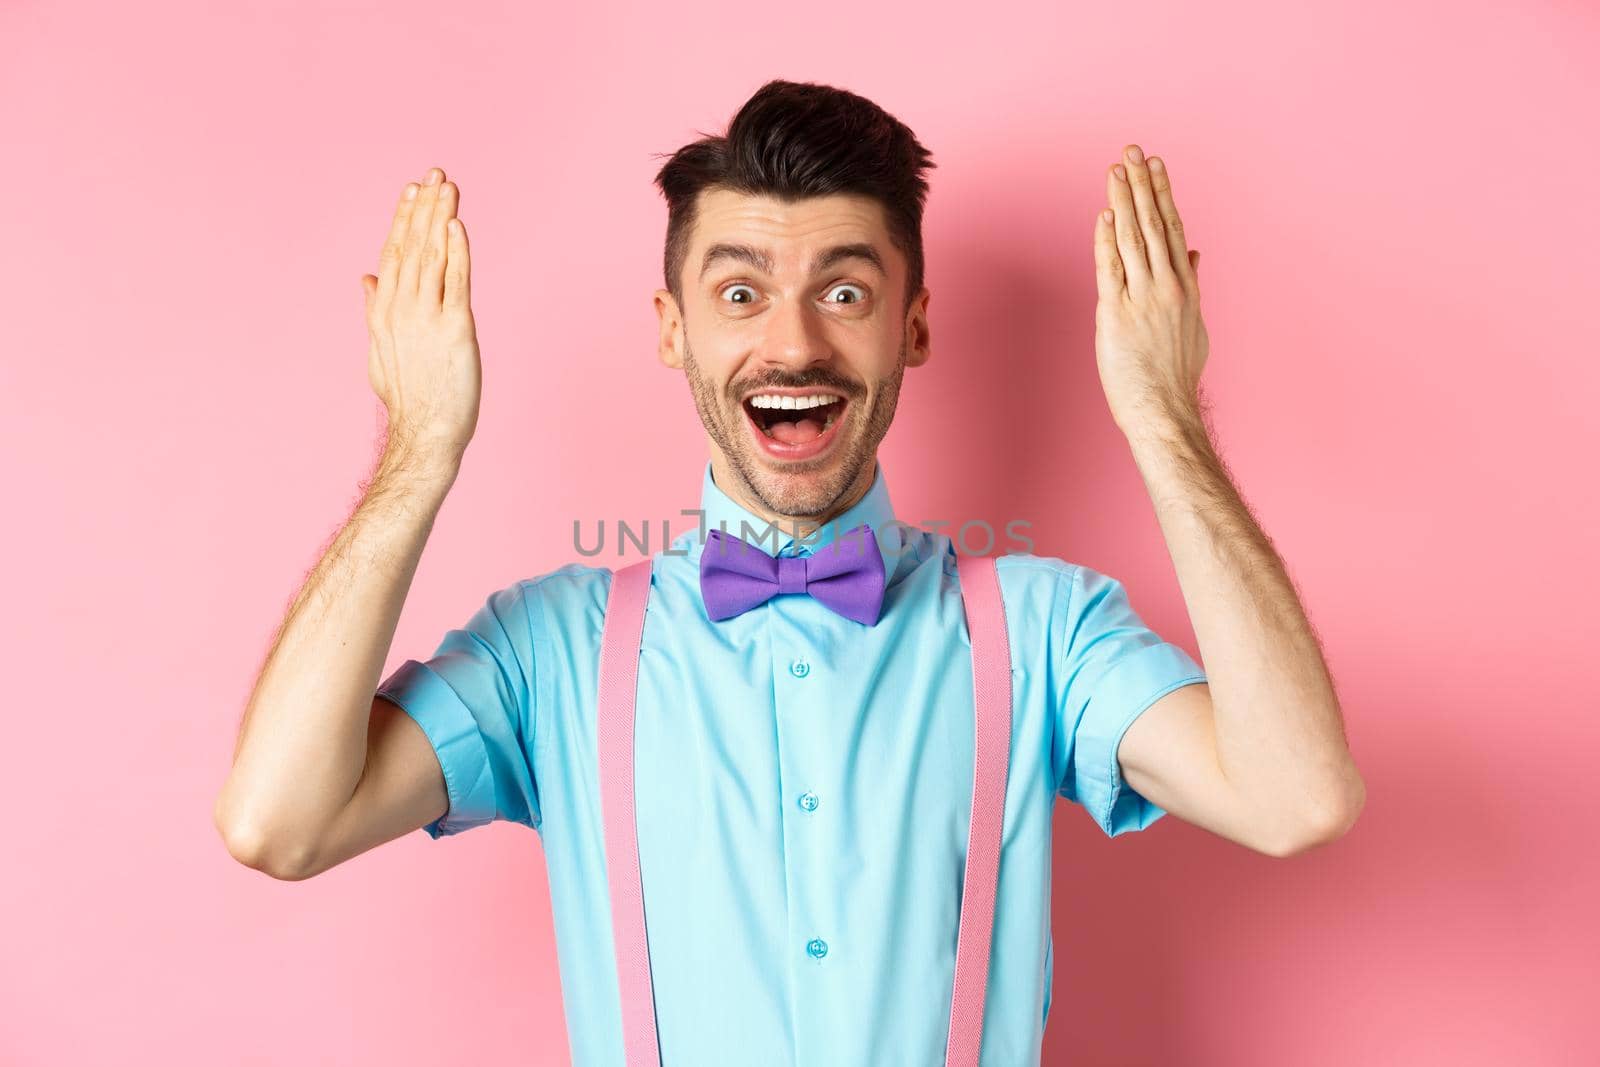 Cheerful young man open eyes for surprise present on holiday celebration, looking amazed at gift, standing on pink background.